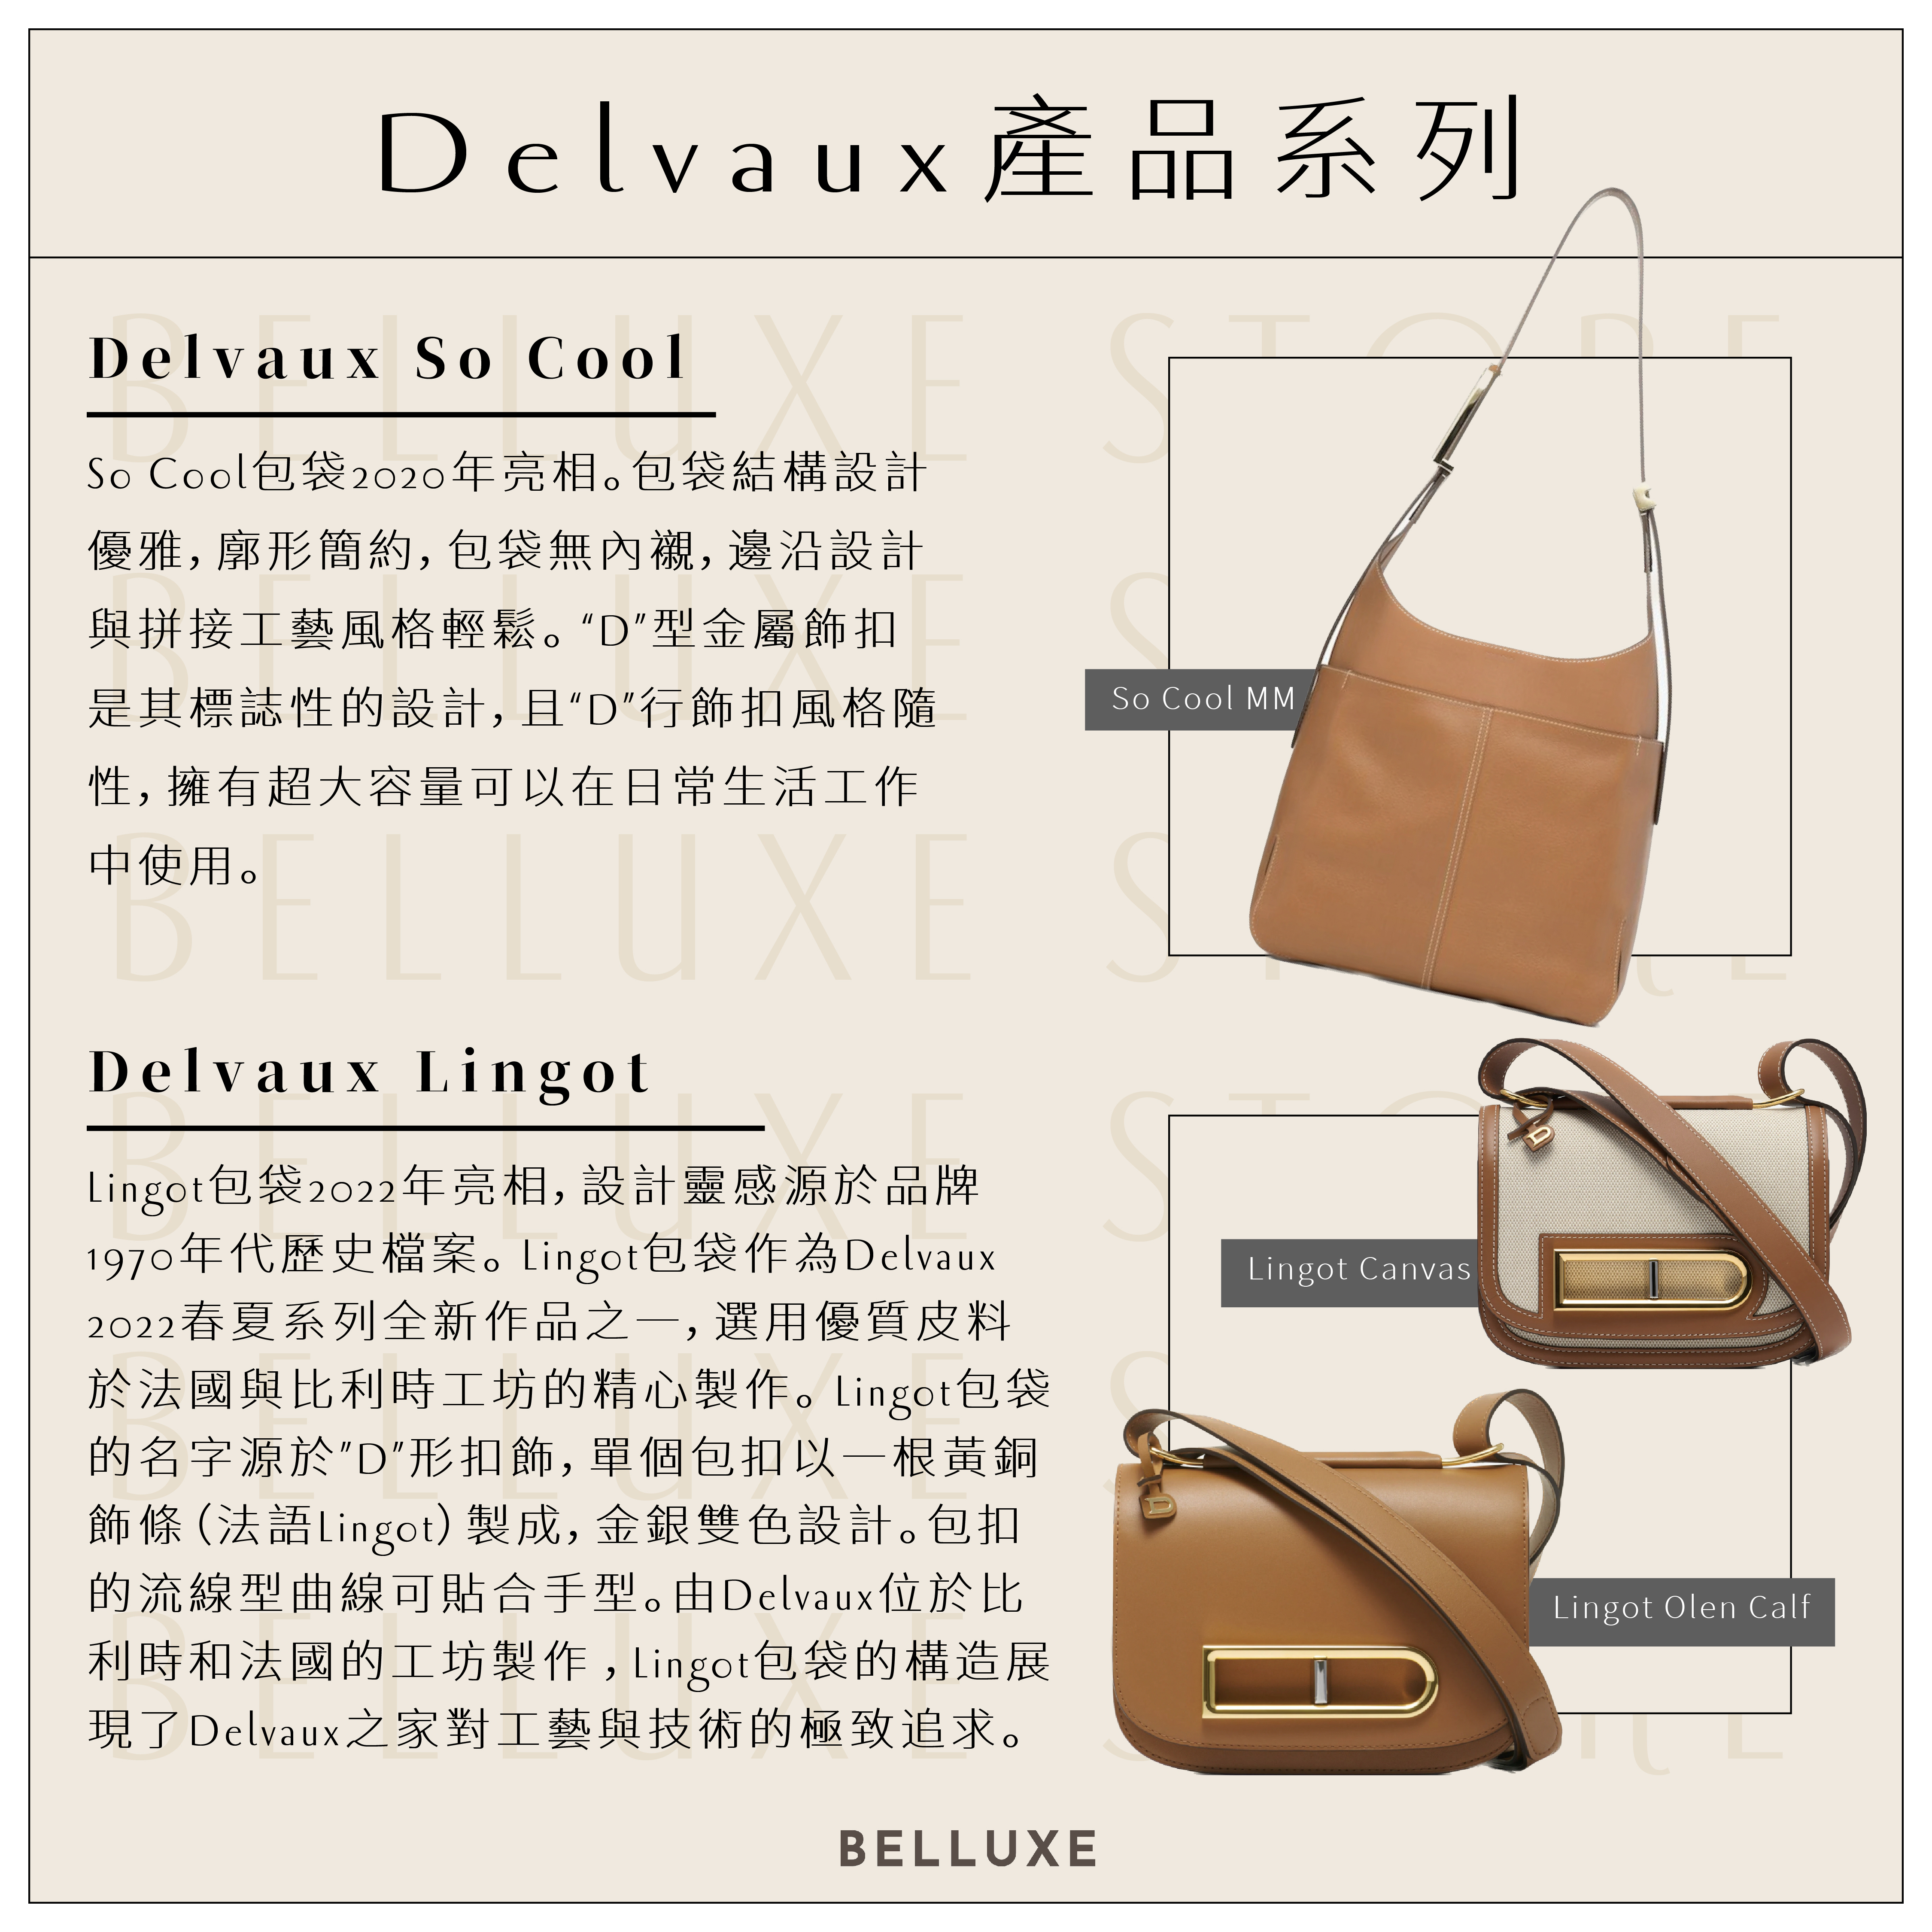 BELLUXE STORE 《Delvaux品牌介绍》